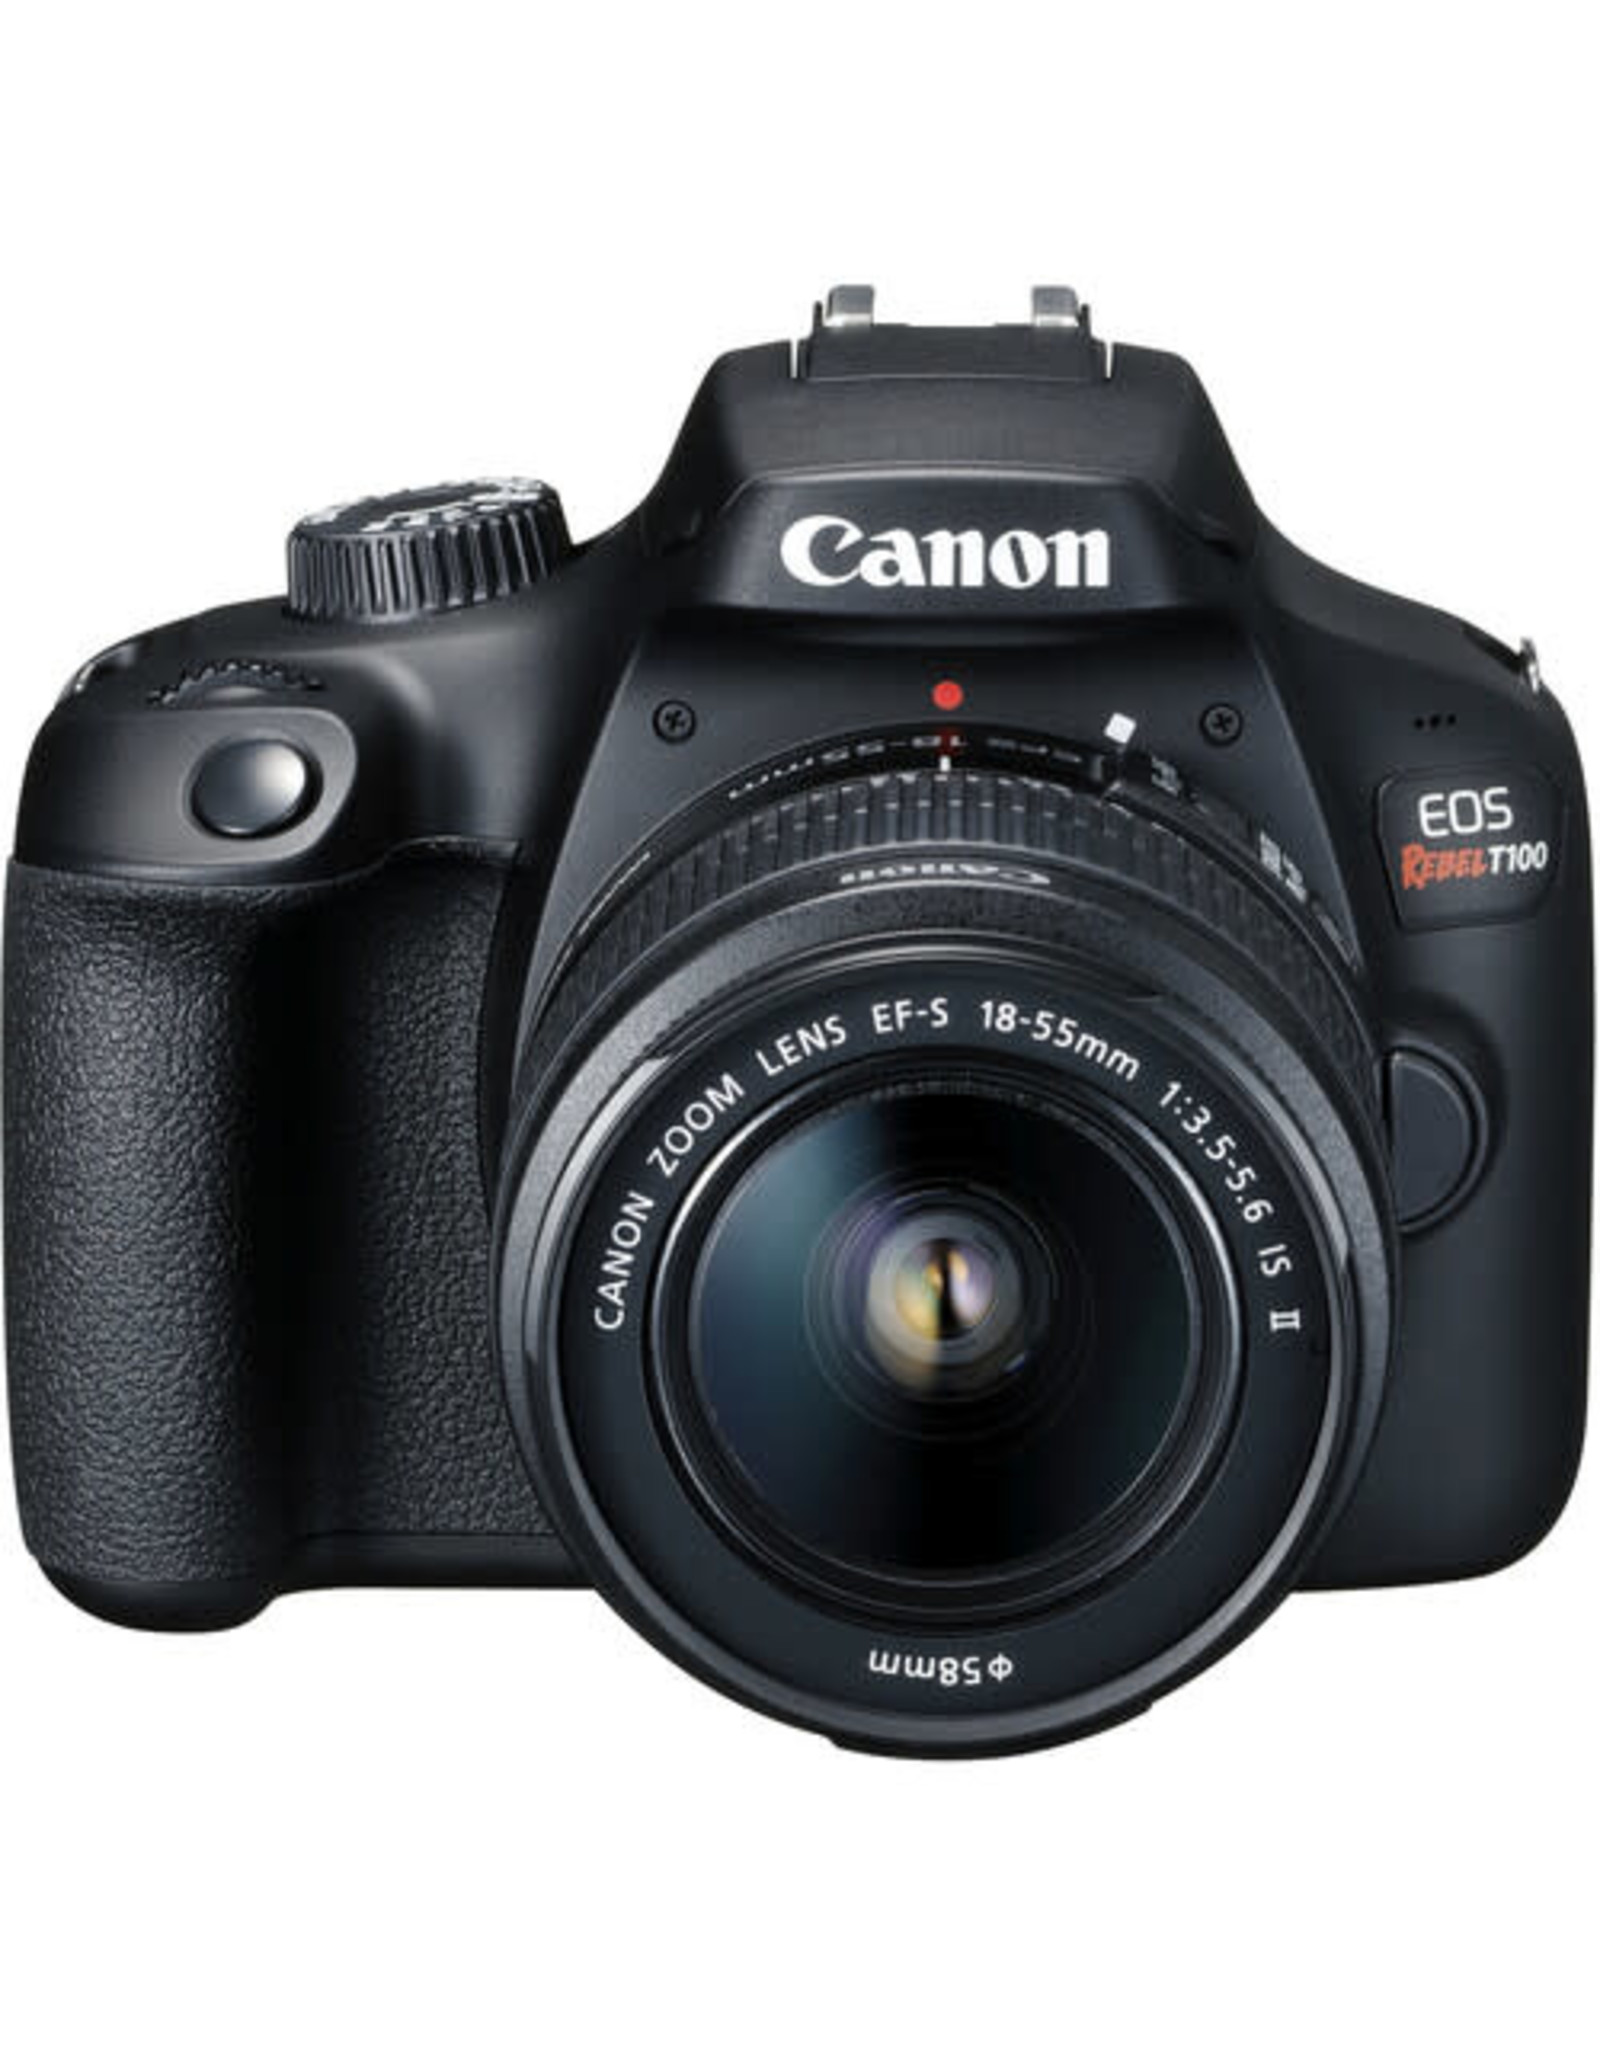 Canon Canon EOS Rebel T100 DSLR Camera with 18-55mm Lens